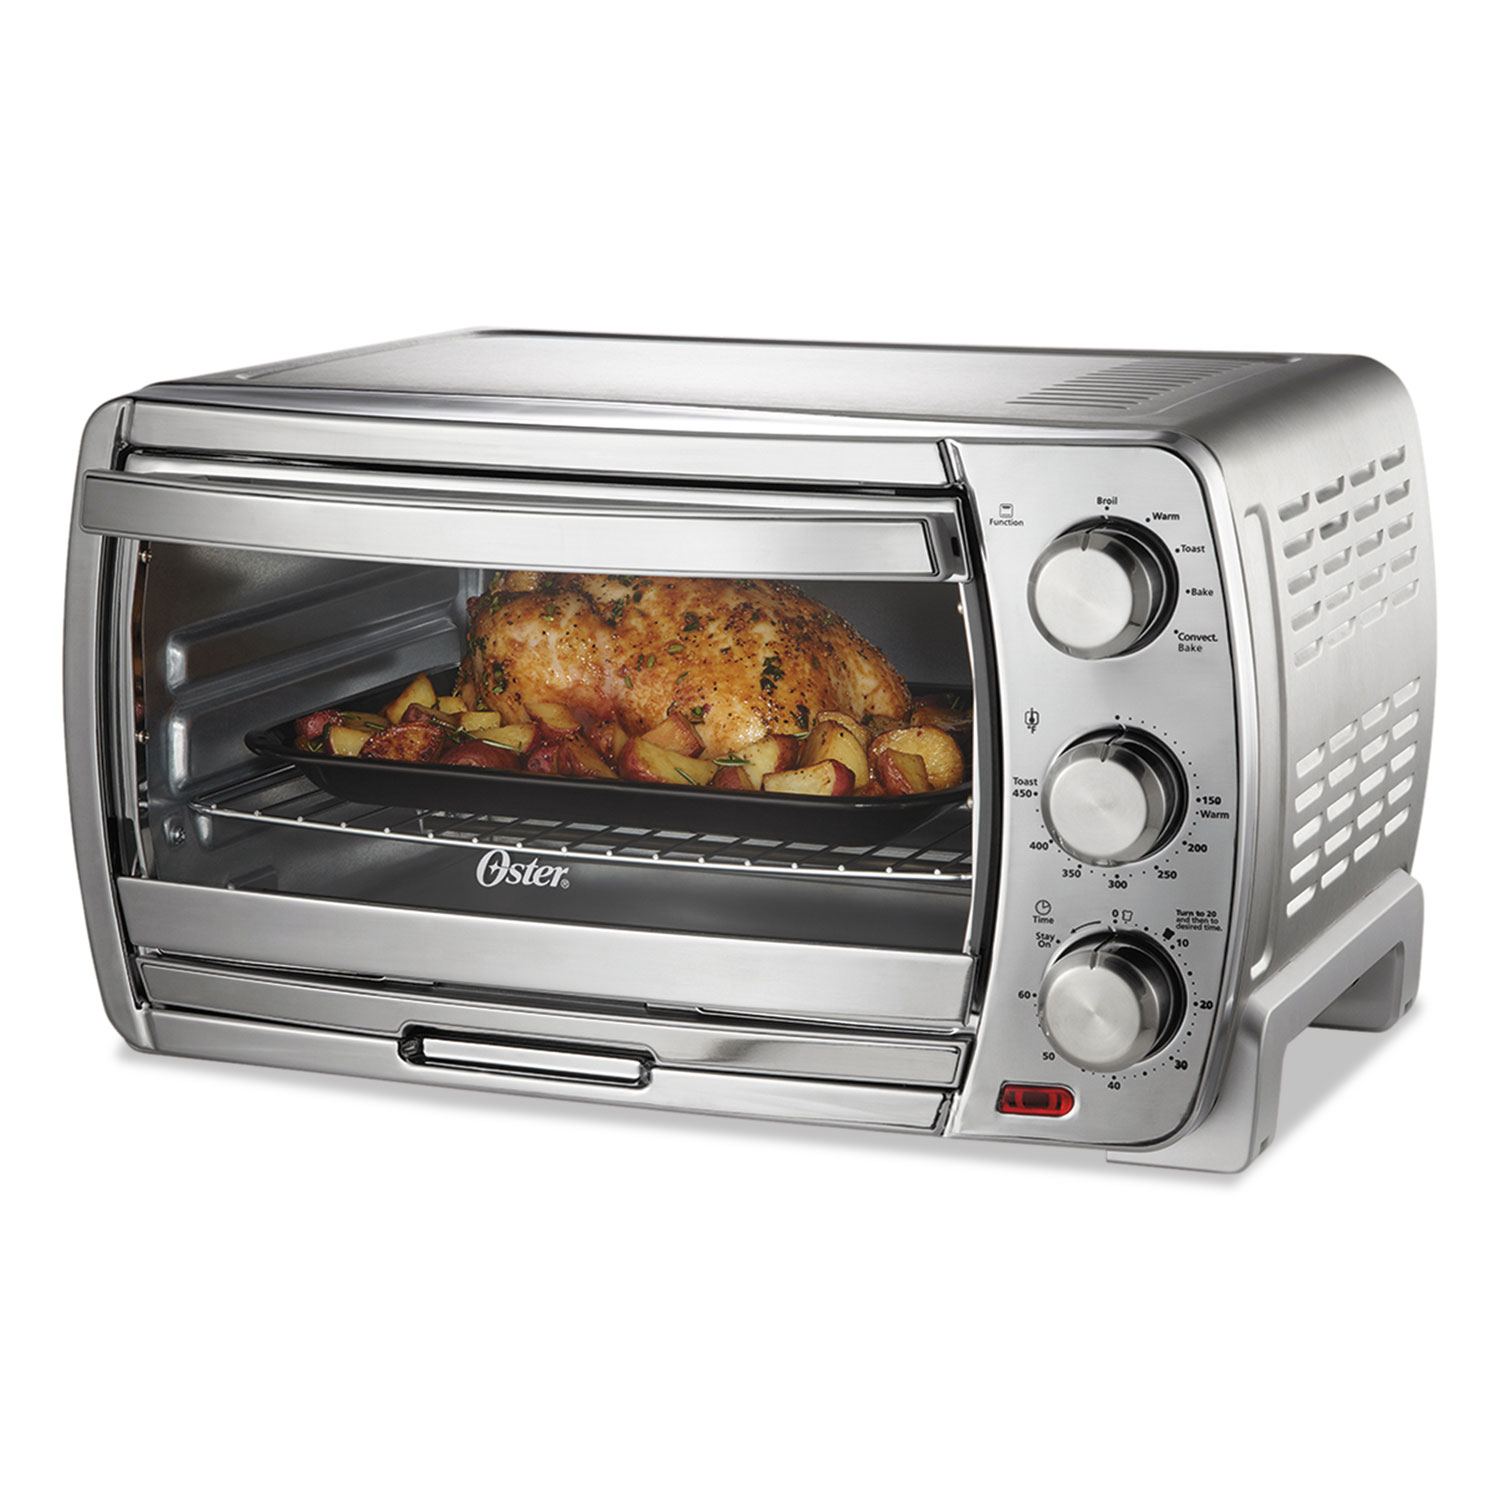 Extra Large Countertop Convection Oven, 18.8 x 22 1/2 x 14.1, Stainless Steel